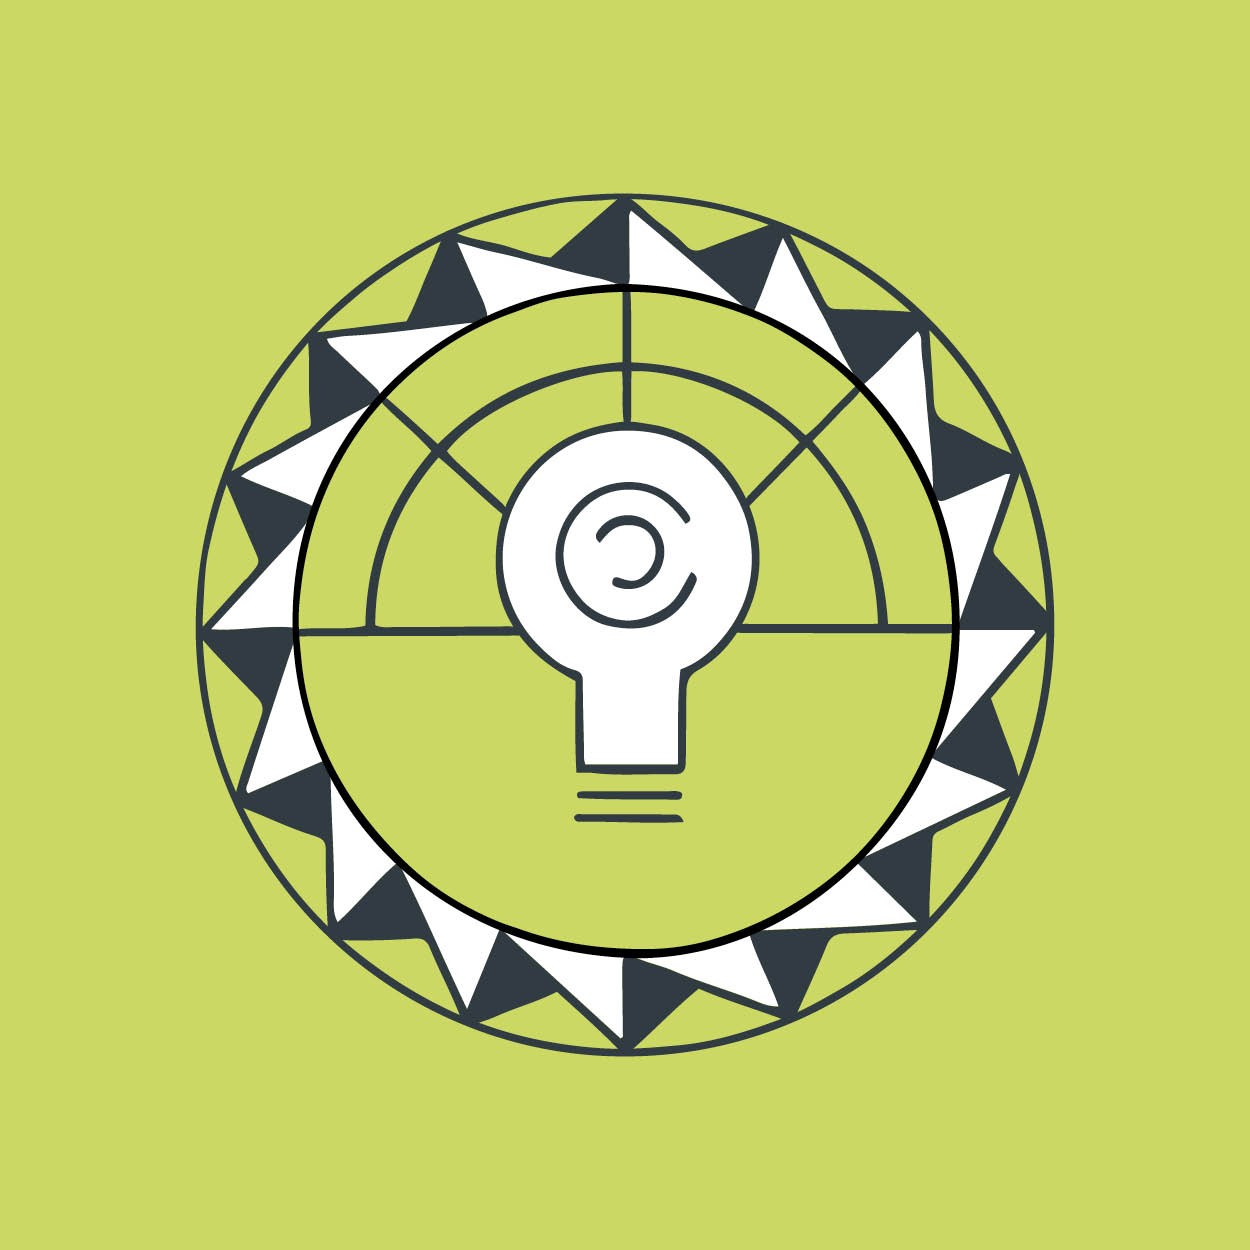 Icon designed by Sandeep Johal: Lightbulb in the middle of a circle